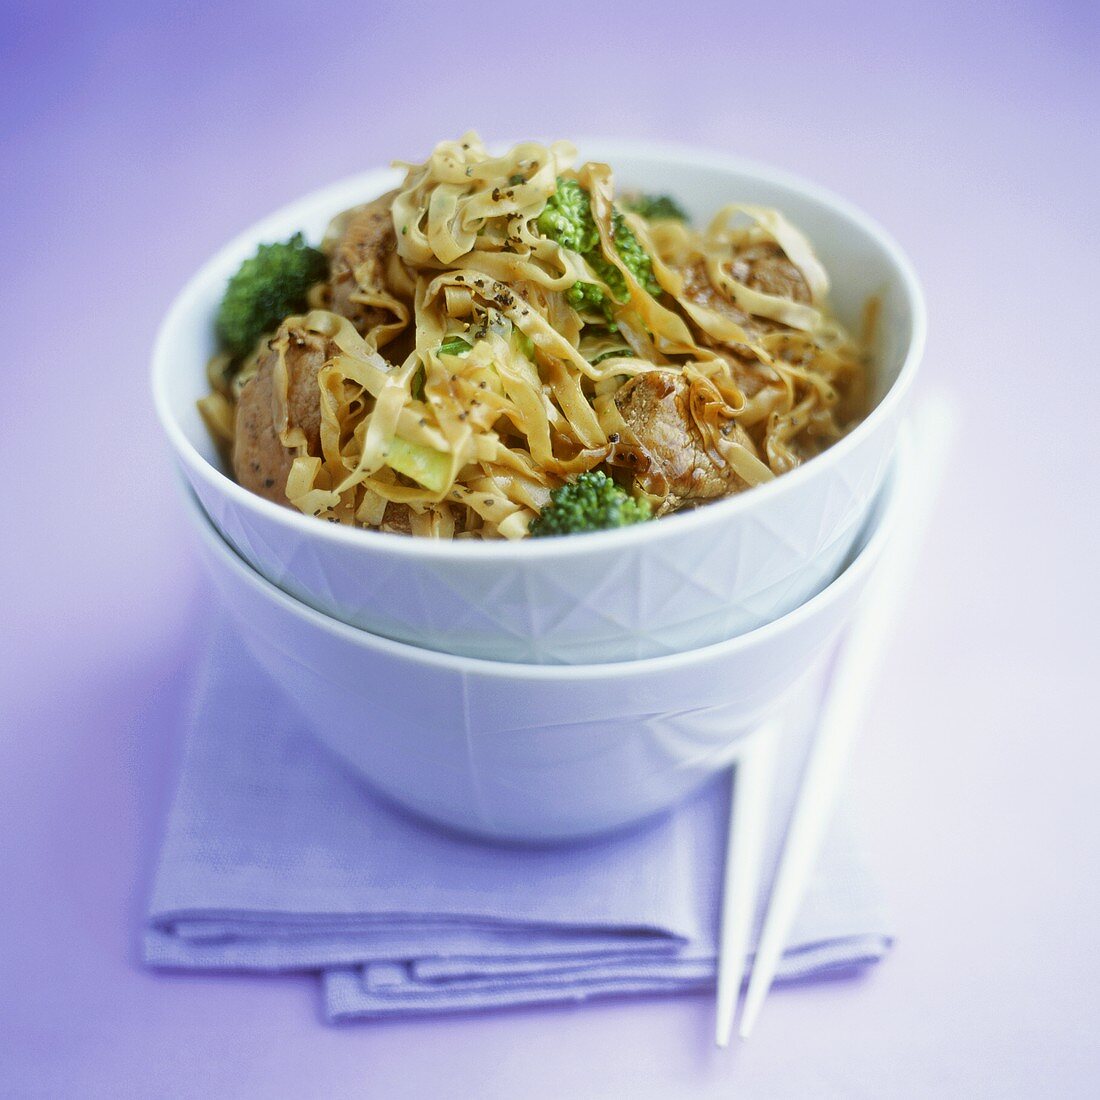 Rice noodles with beef and broccoli